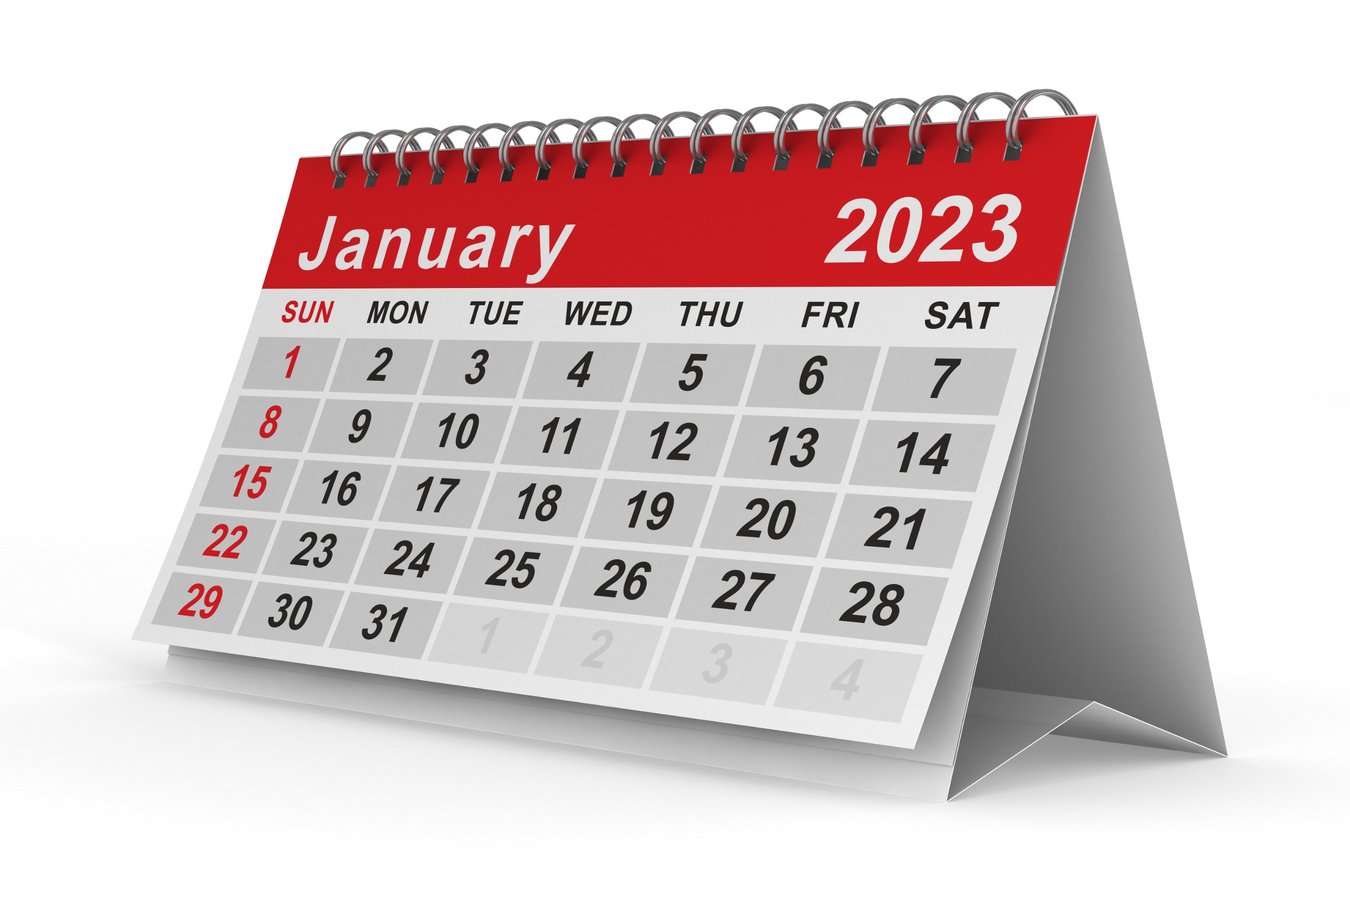 USDEC's 2023 Global Dairy Business Year-in-Review